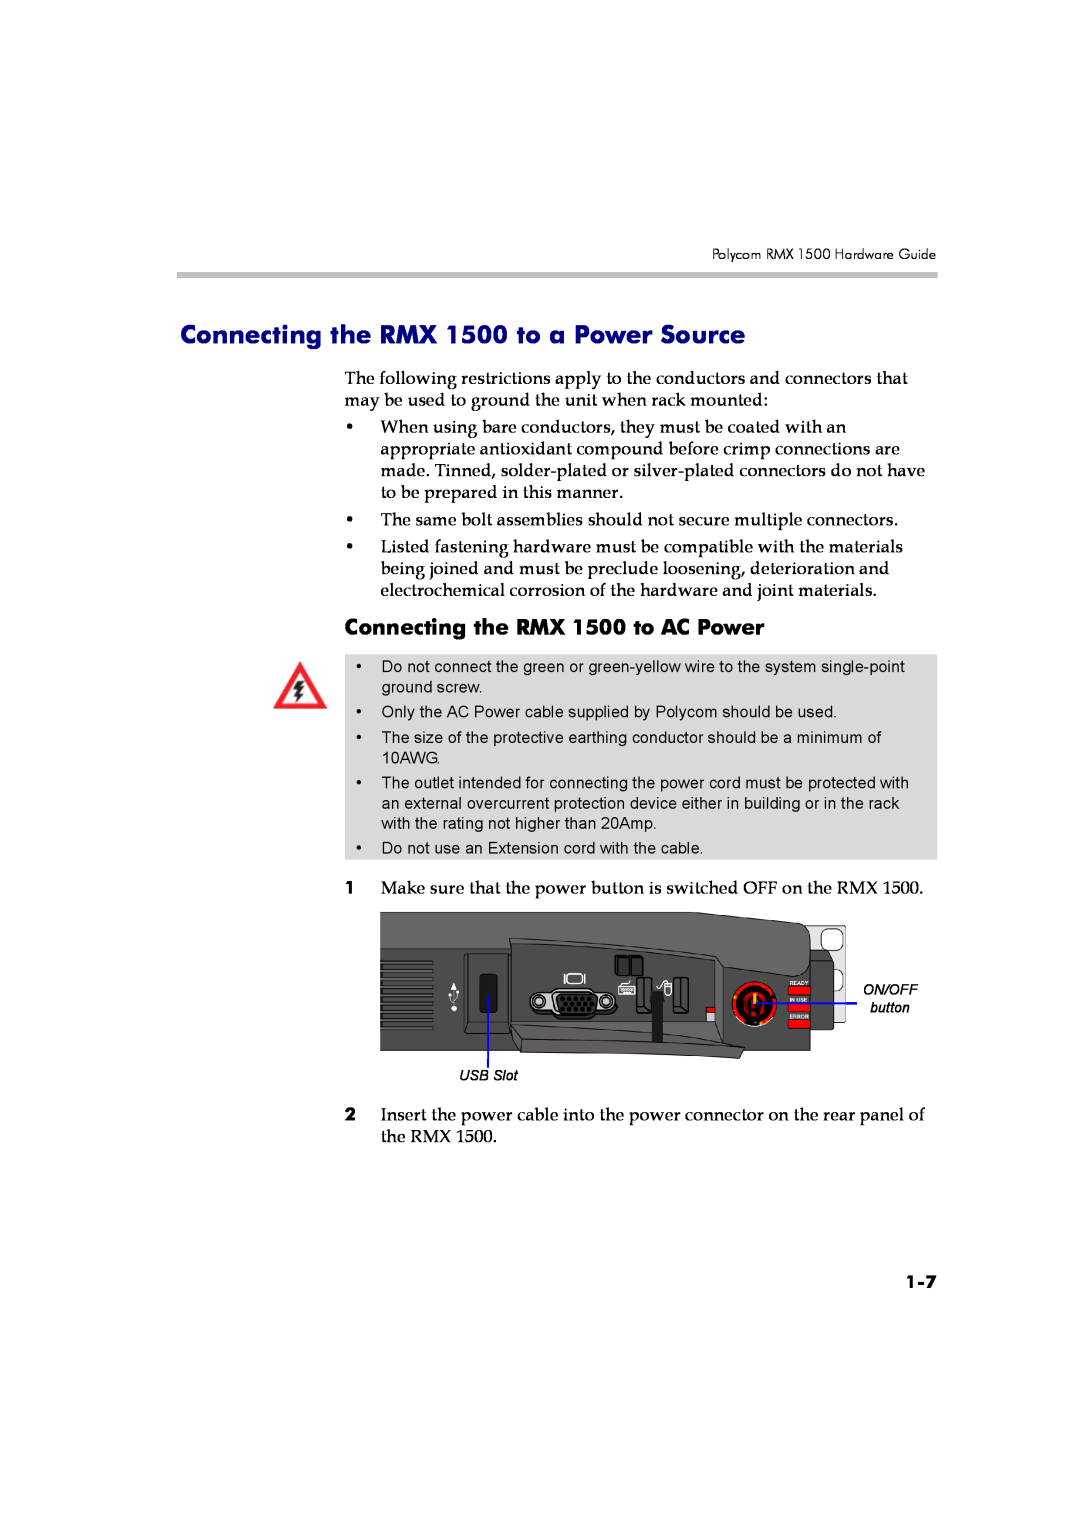 Polycom DOC2557A manual Connecting the RMX 1500 to a Power Source, Connecting the RMX 1500 to AC Power 